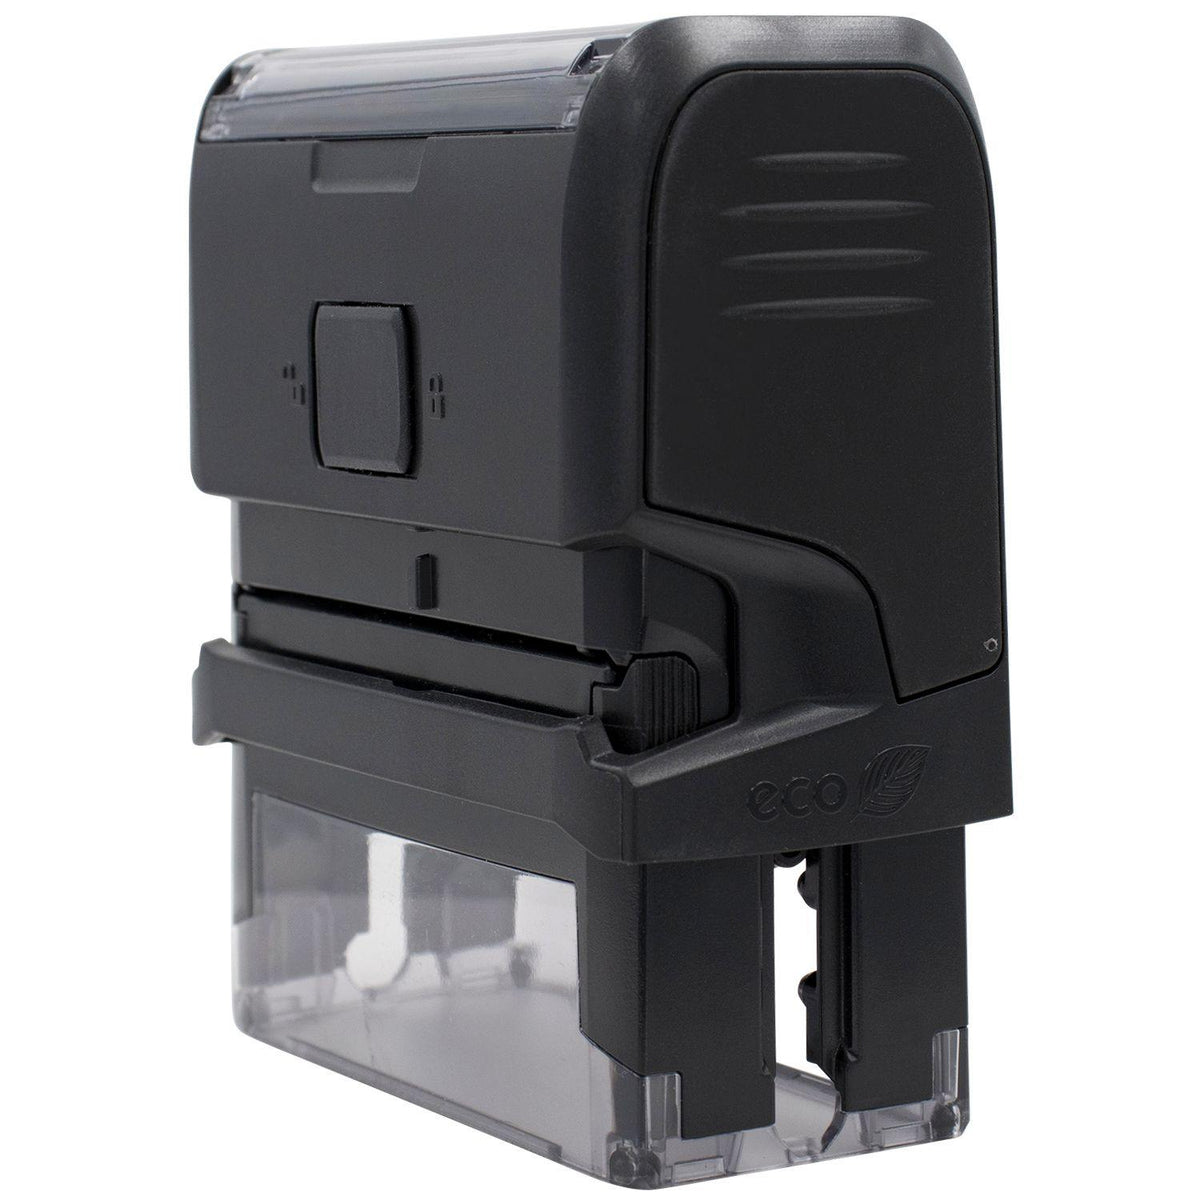 Large Self Inking Trustee Exhibit Stamp - Engineer Seal Stamps - Brand_Trodat, Impression Size_Large, Stamp Type_Self-Inking Stamp, Type of Use_Legal